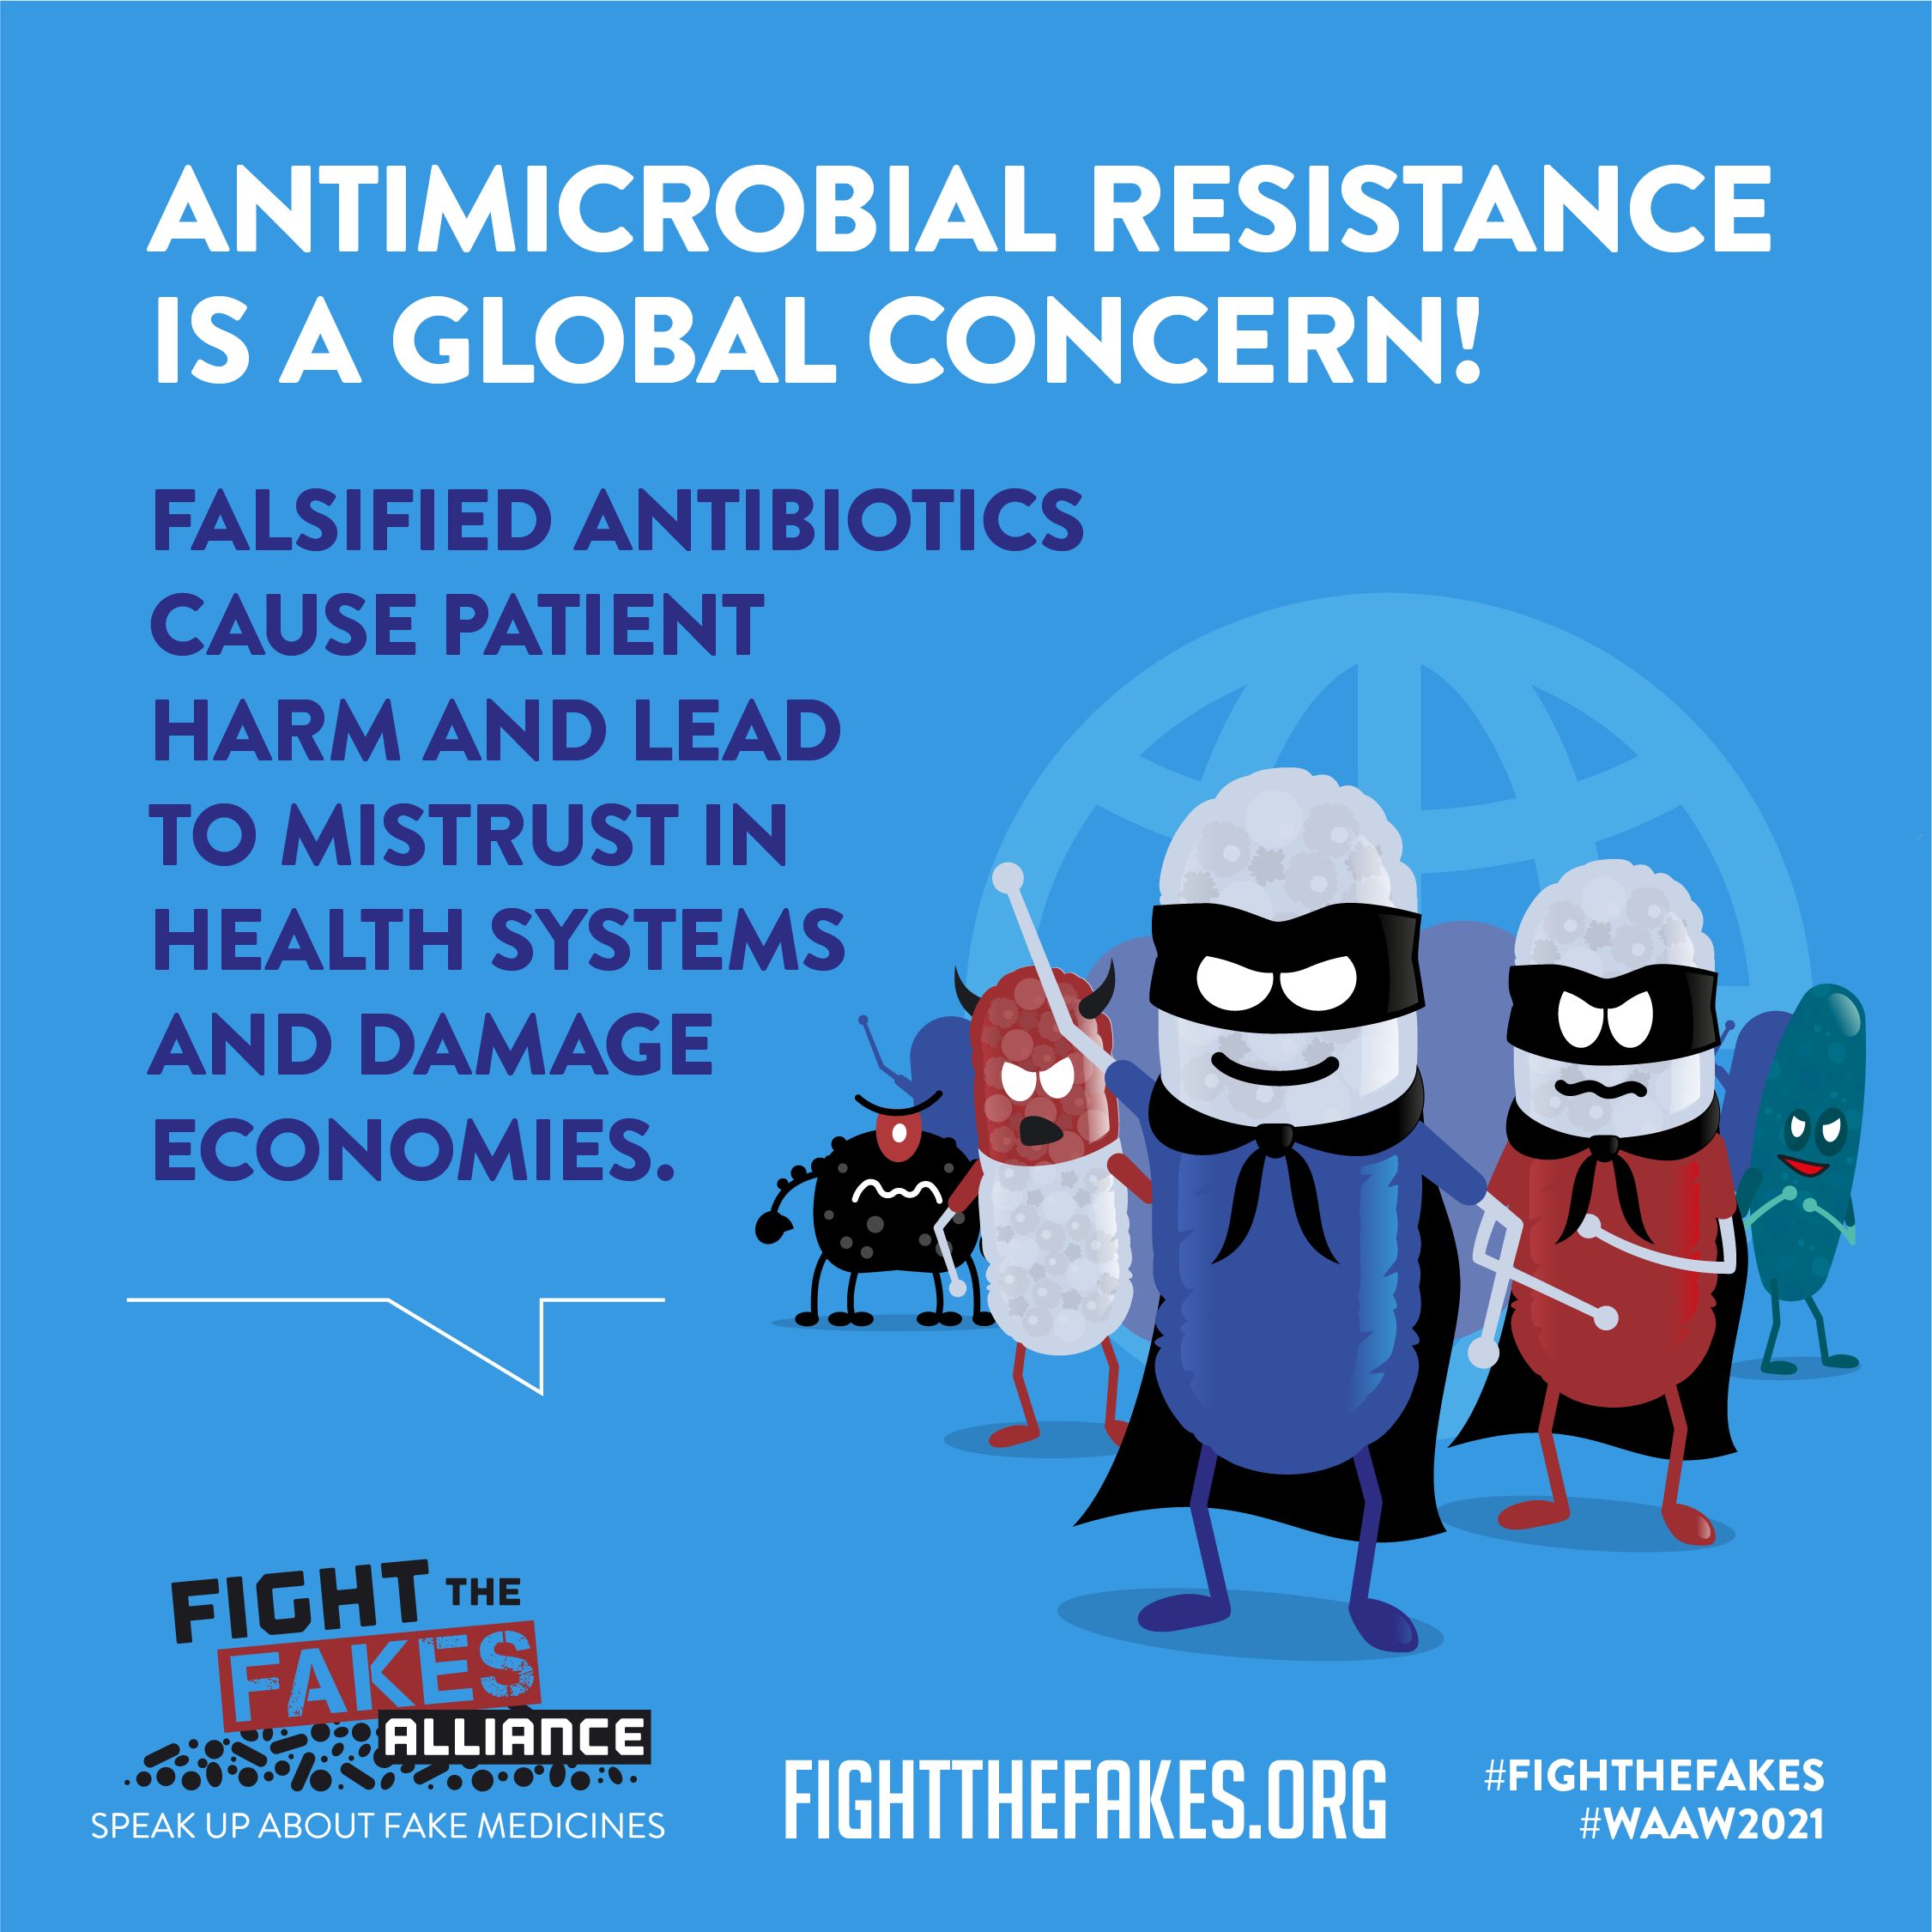 World Antimicrobial Awareness Week 2021 – Fight the Fakes